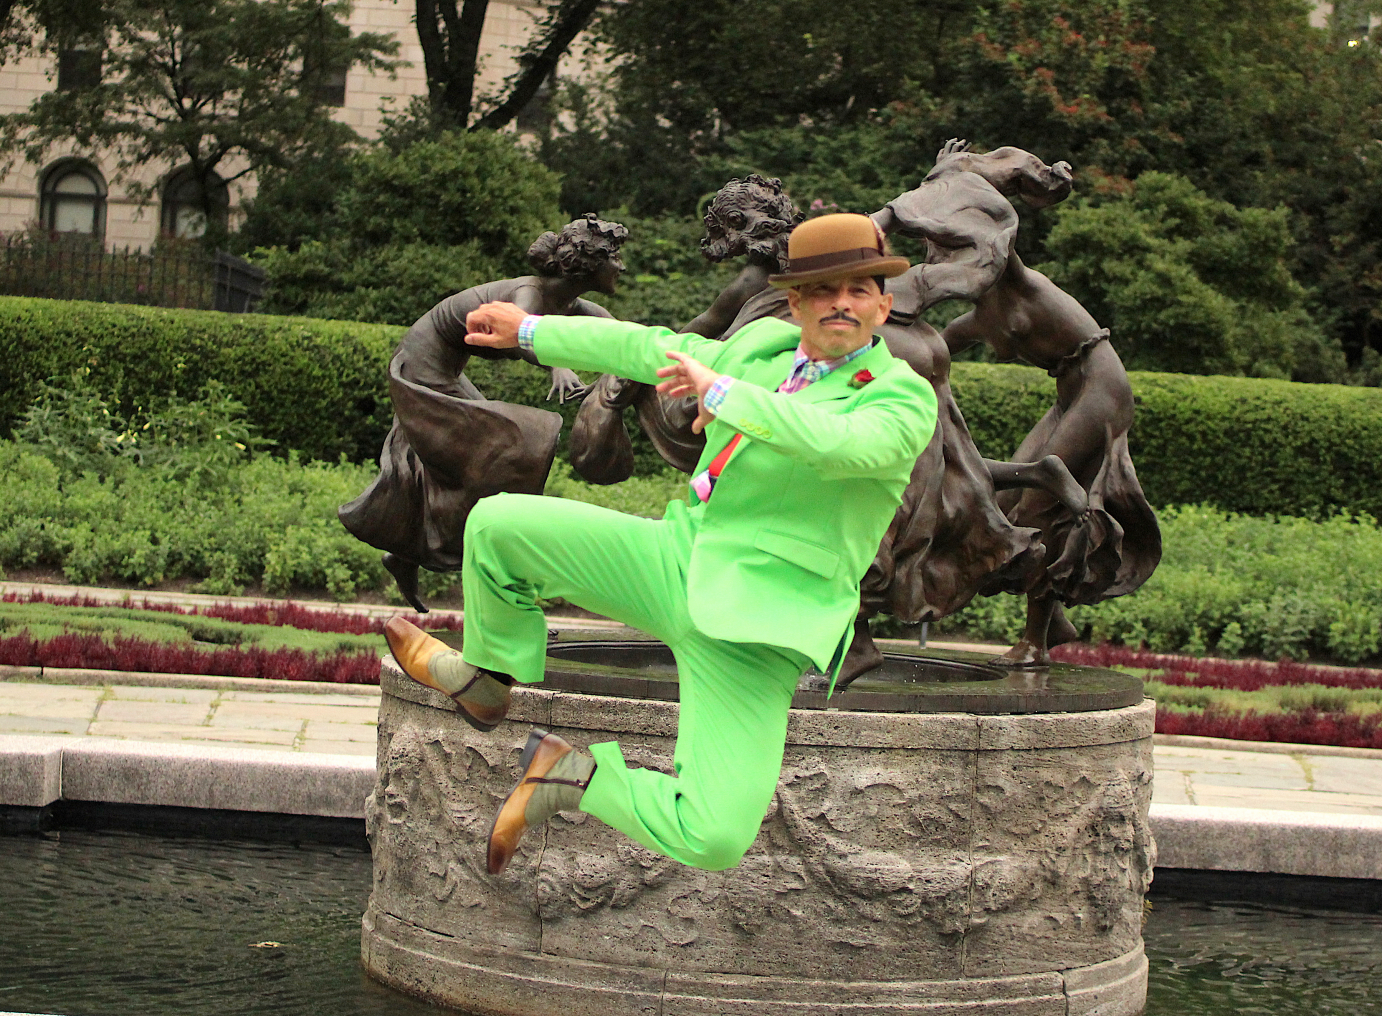 In a bright green suit, Arthur Aviles clicks his heels together. He wears a derby and has a thin mustache.